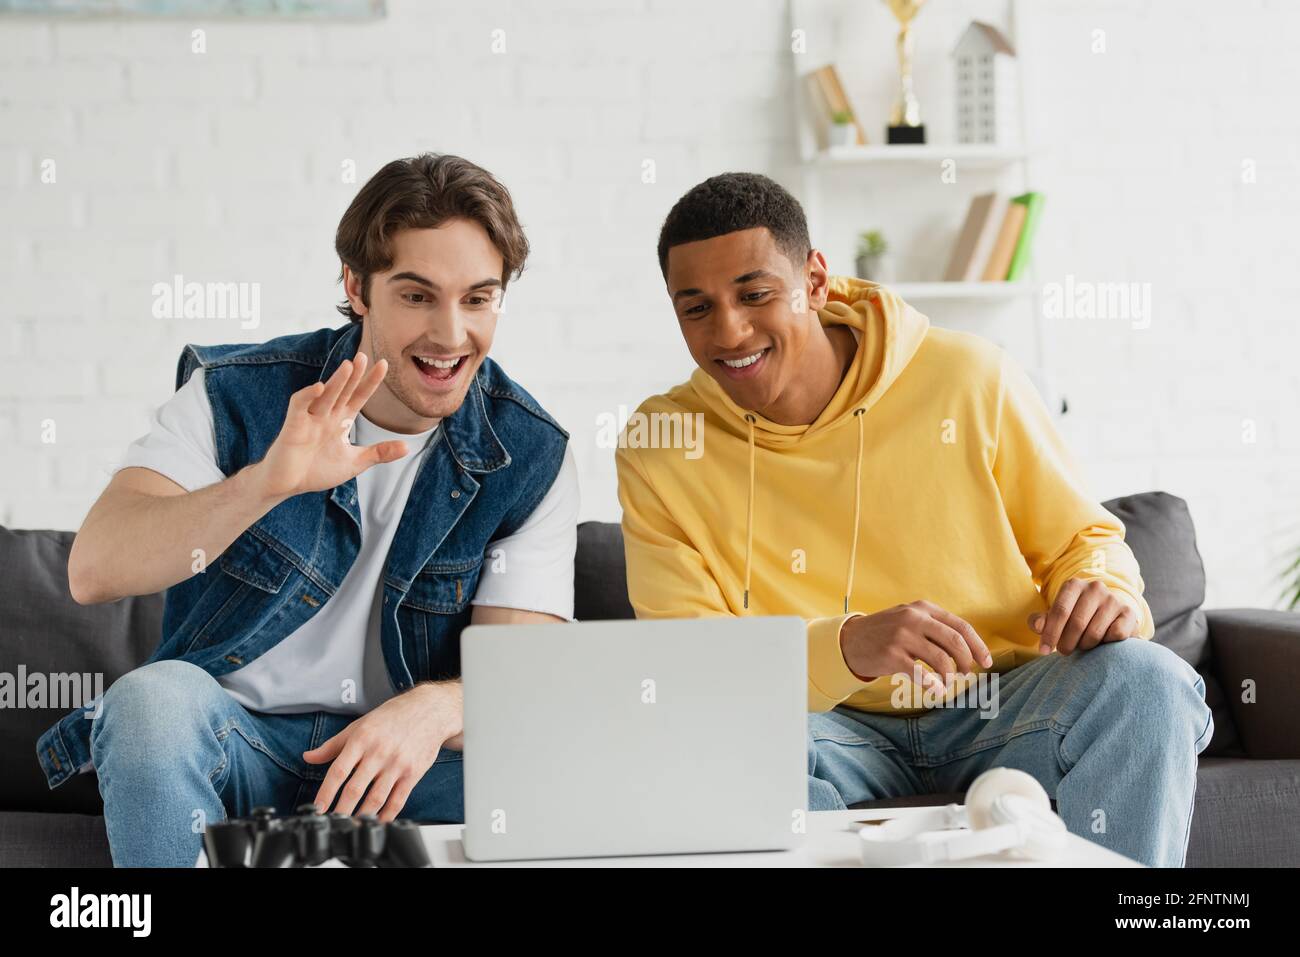 Friends Using Laptop On Sofa Mixed Race Typing Having Photo